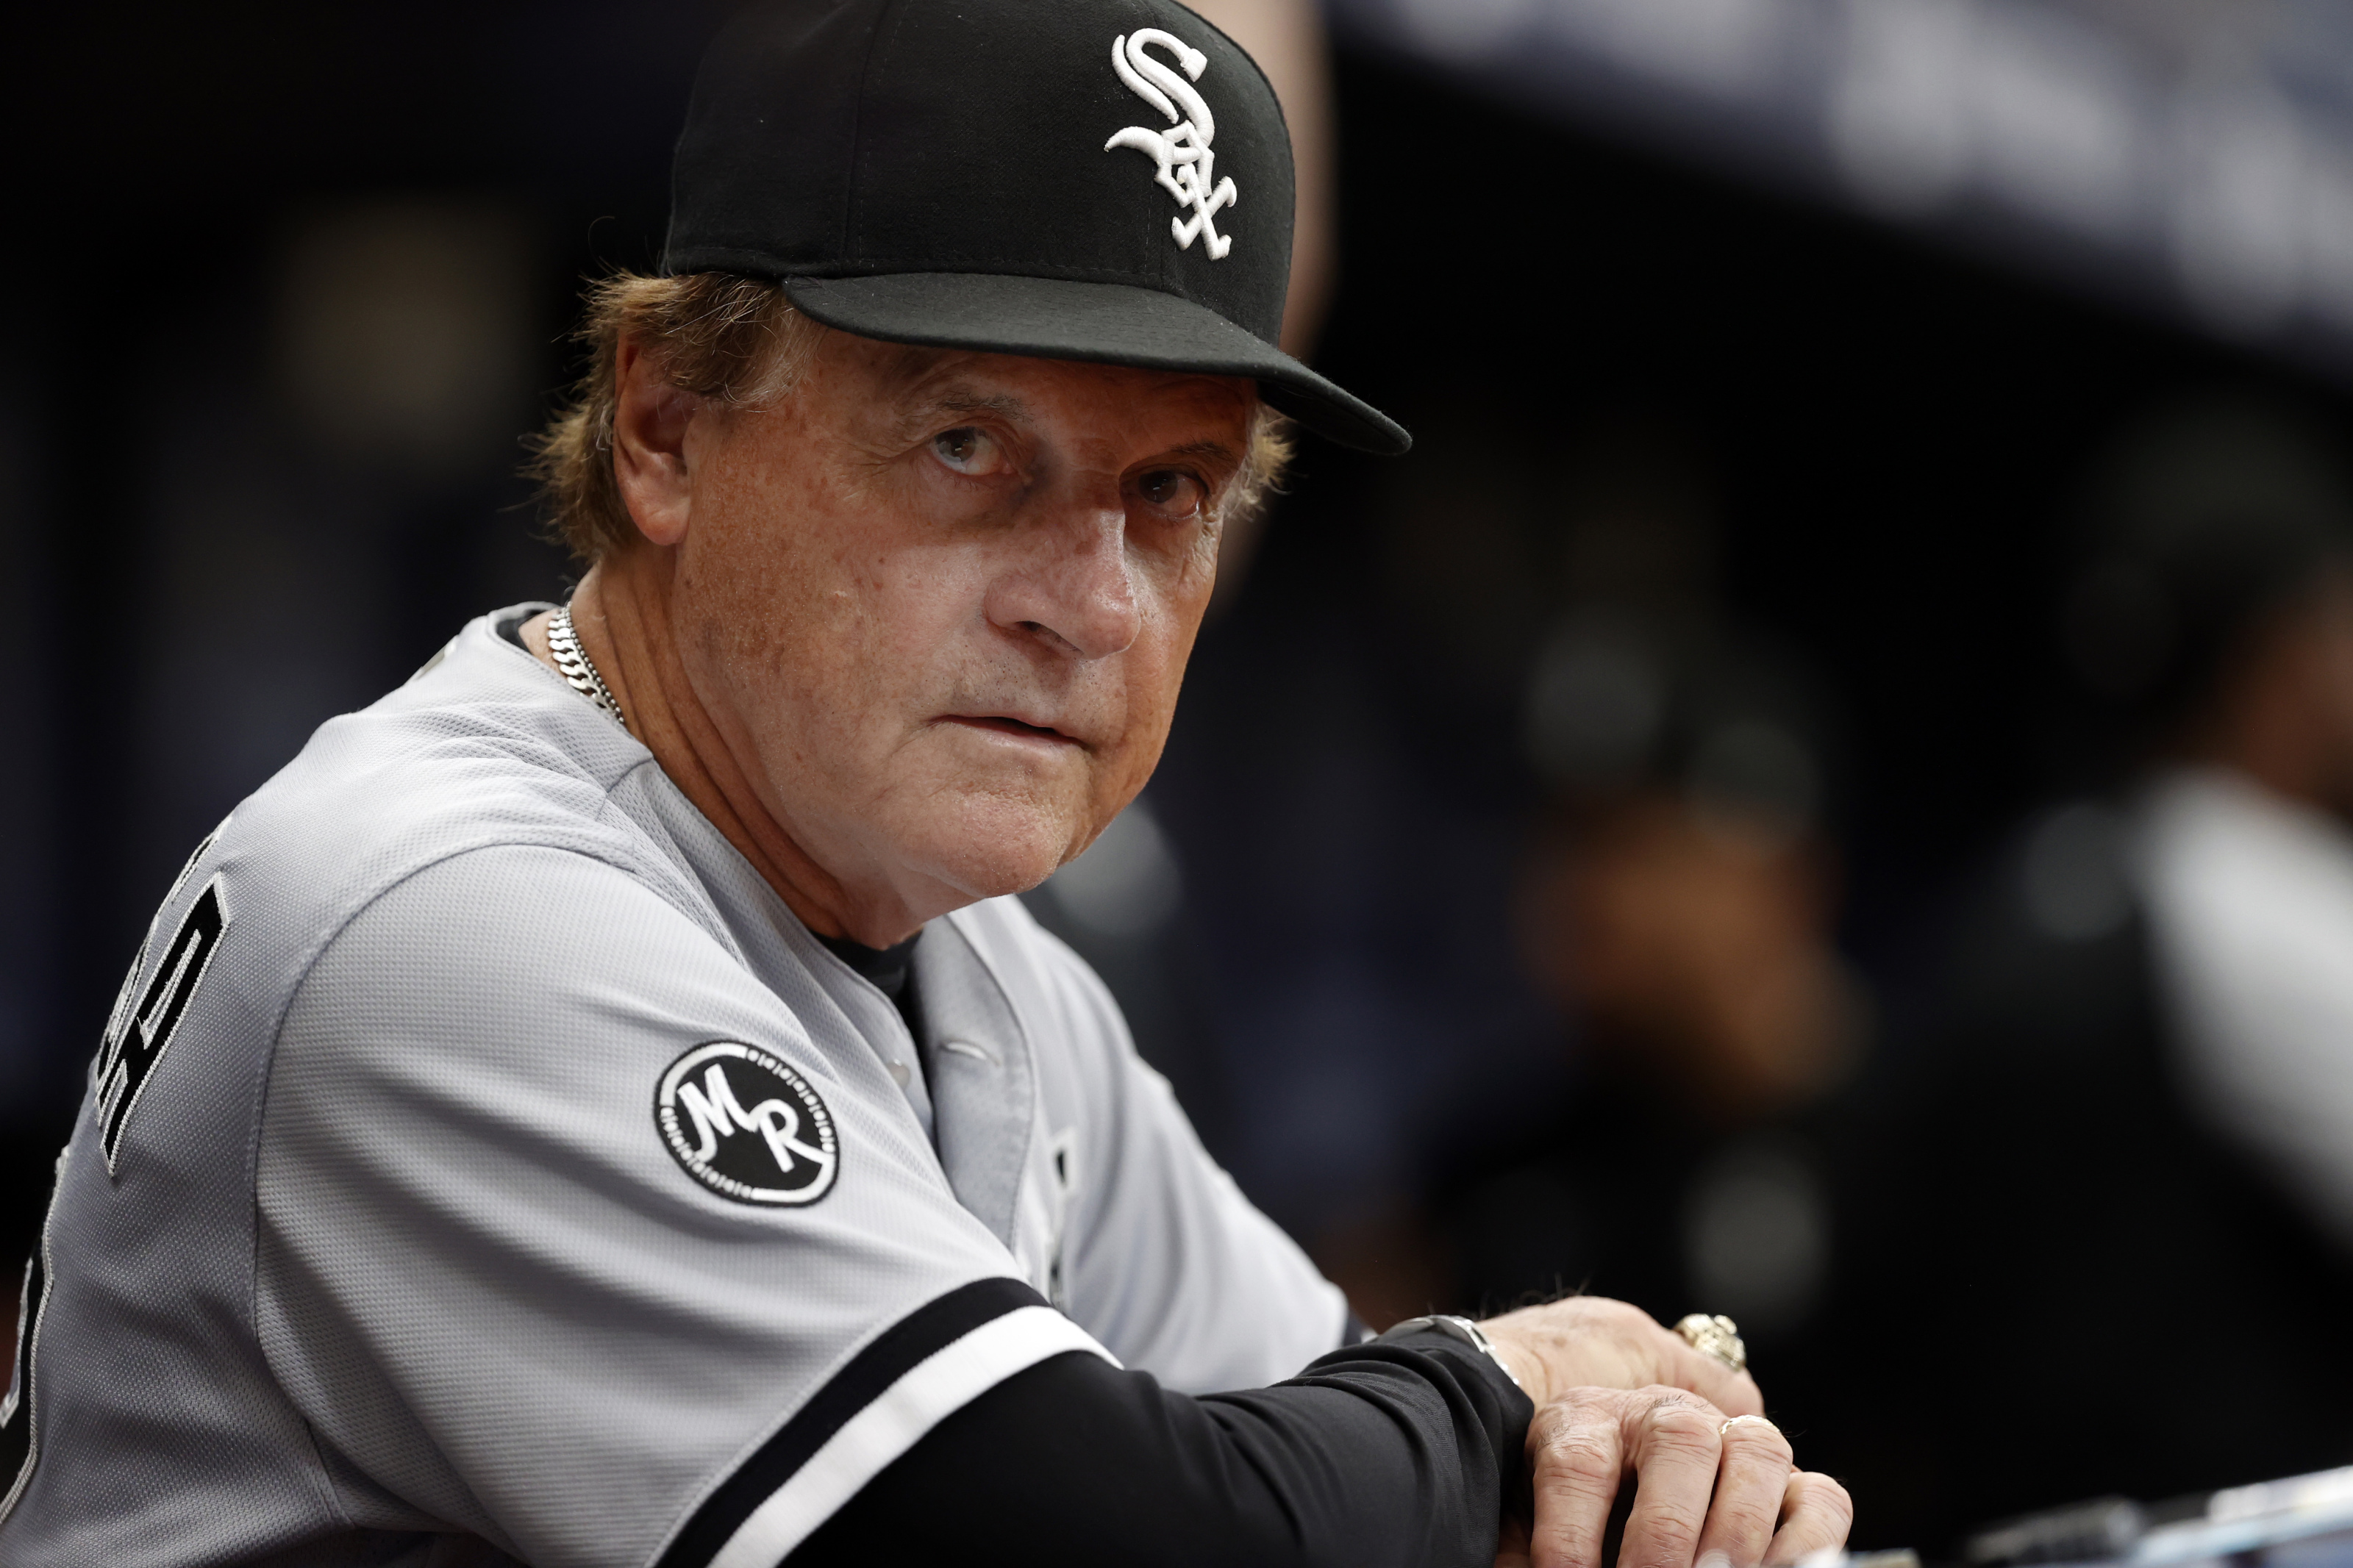 Does White Sox Manager Tony La Russa Deserve Credit for His Team's